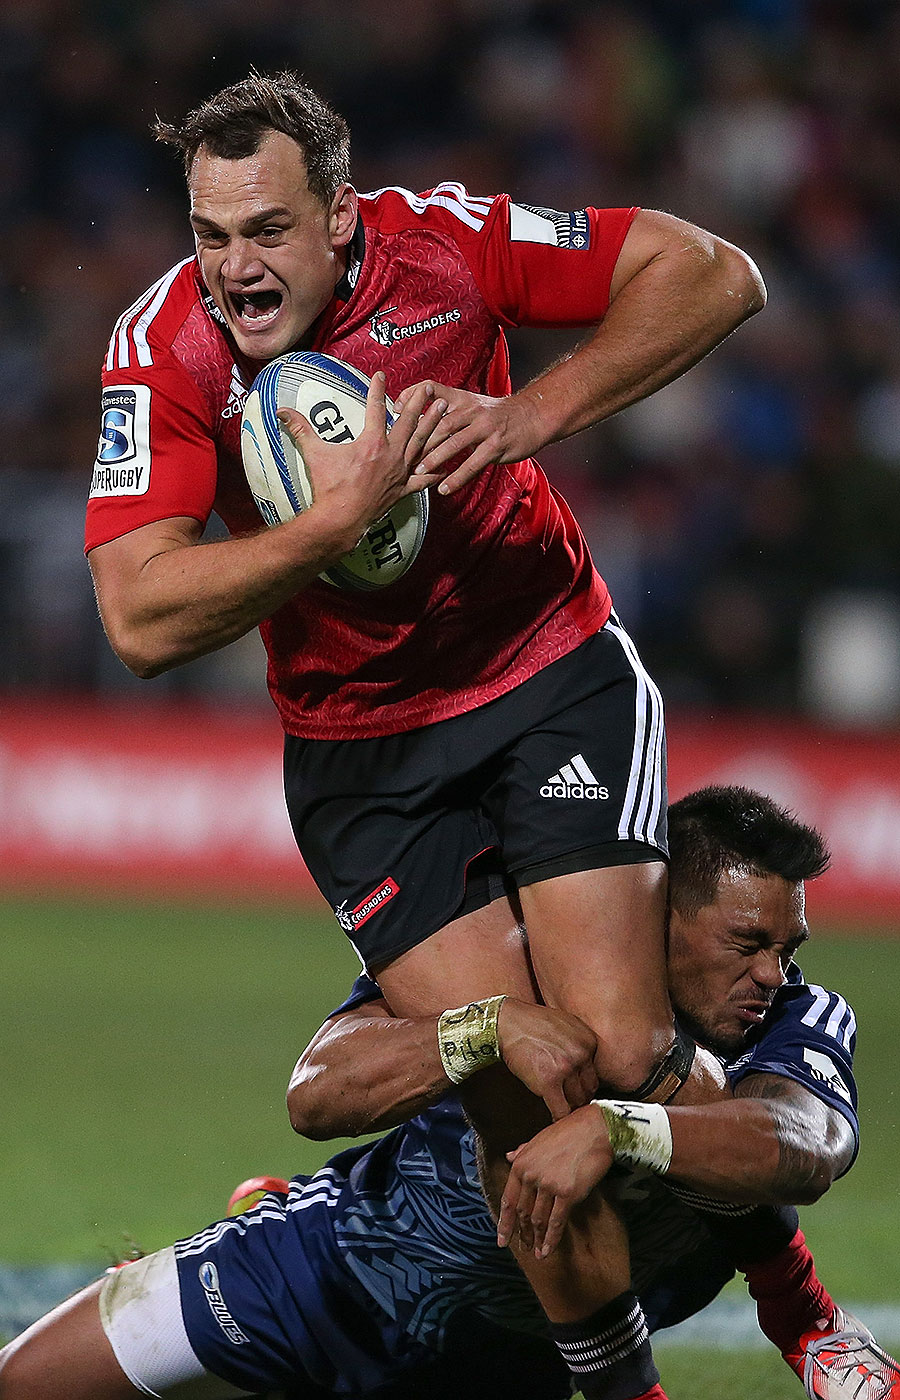 The Crusaders' Israel Dagg is tackled